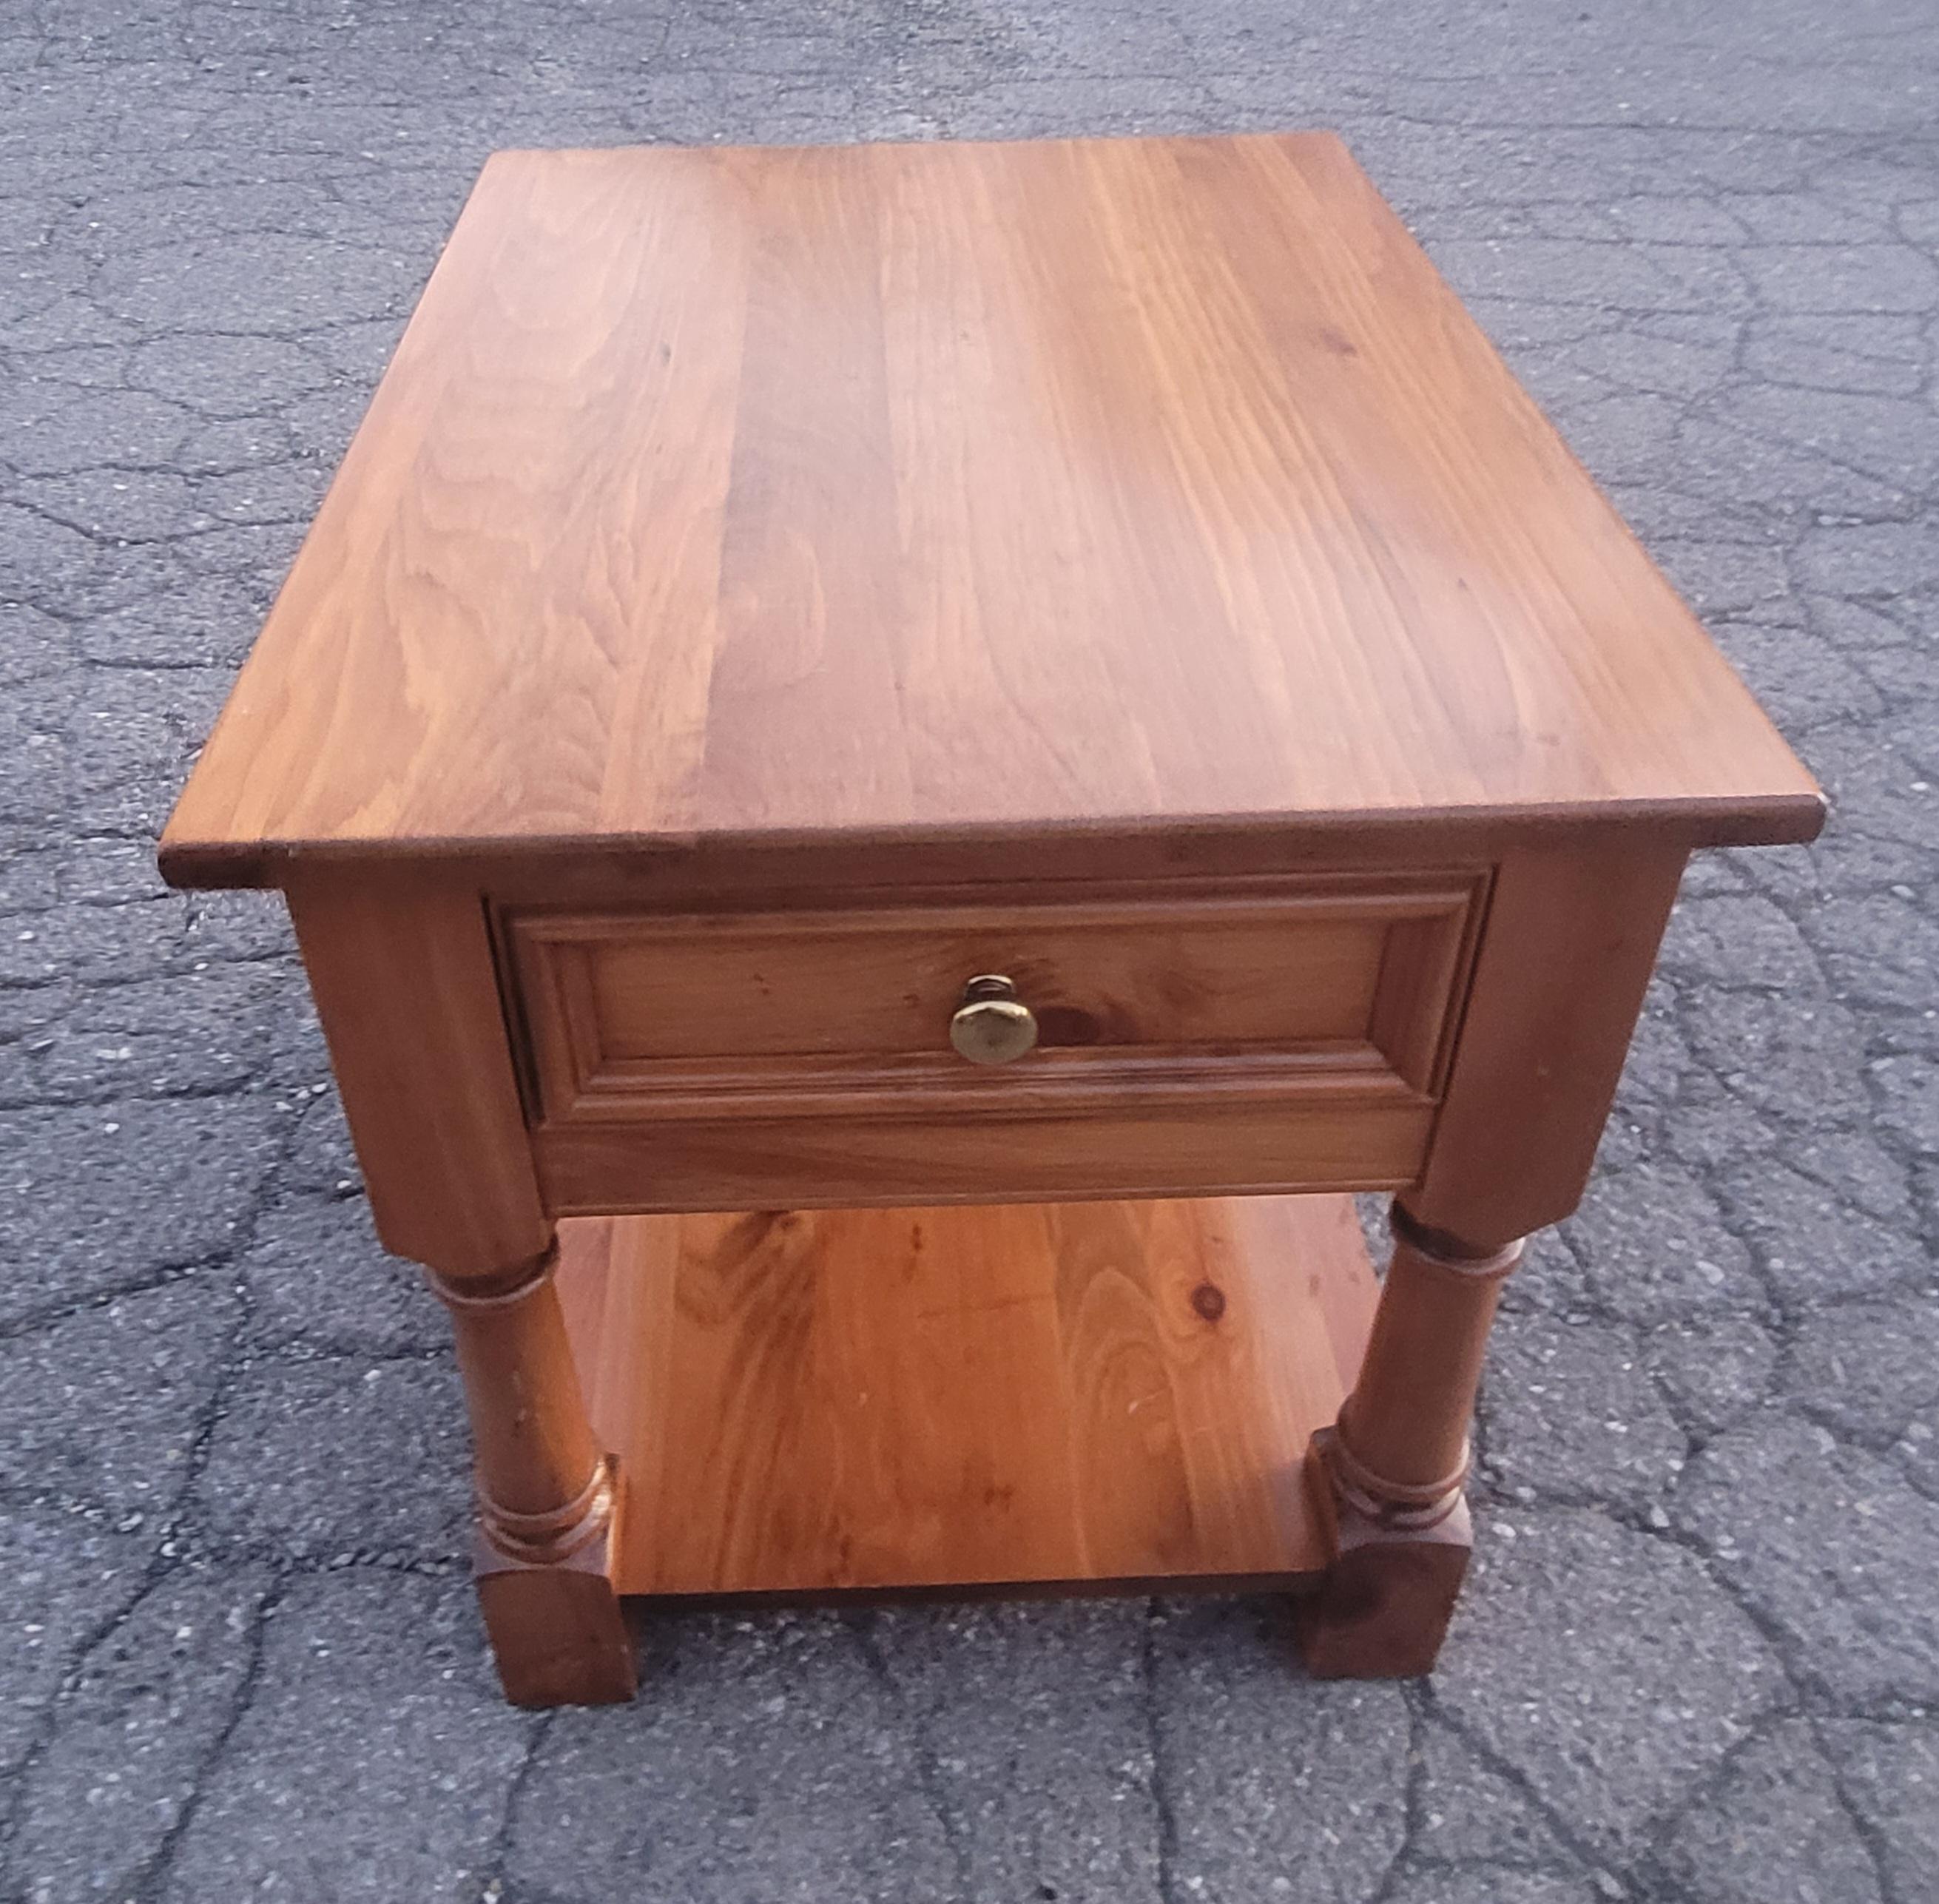 A Pennsylvania House Red Pine Tiered Single Drawer Side Table or Nightstand in great vintage condition. Measures 20